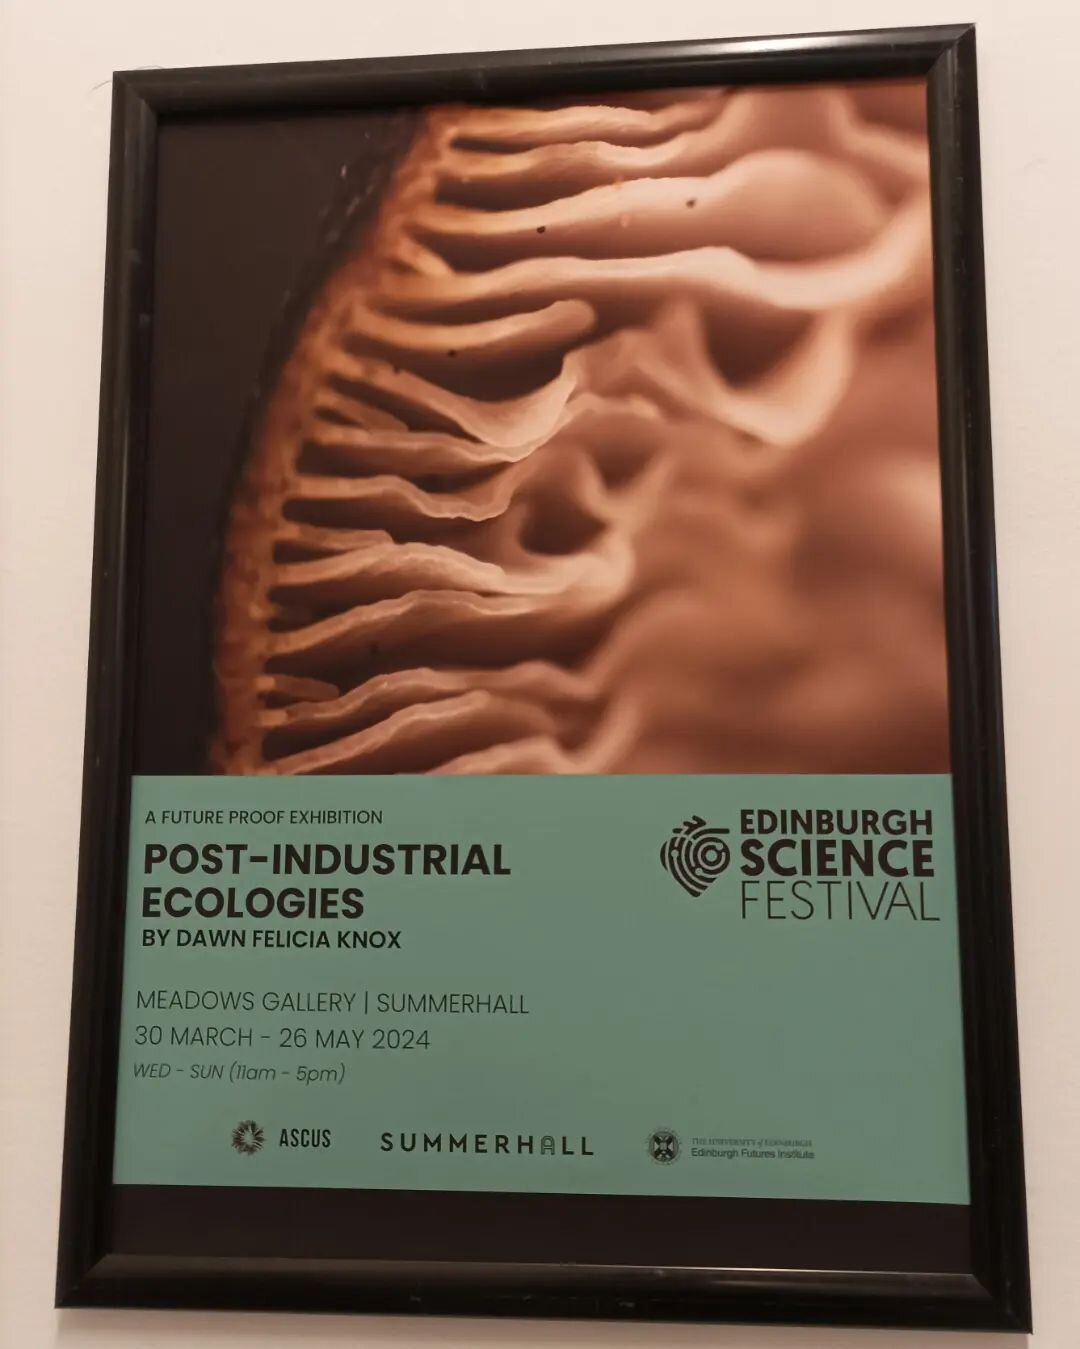 Highlights from Saturday in Edinburgh exploring the opening day of the Edinburgh Science Festival - the first one is Post-Industrial Ecologies by Dawn Felicia Knox, a three room multi stage installation display including projections, microscopy and c